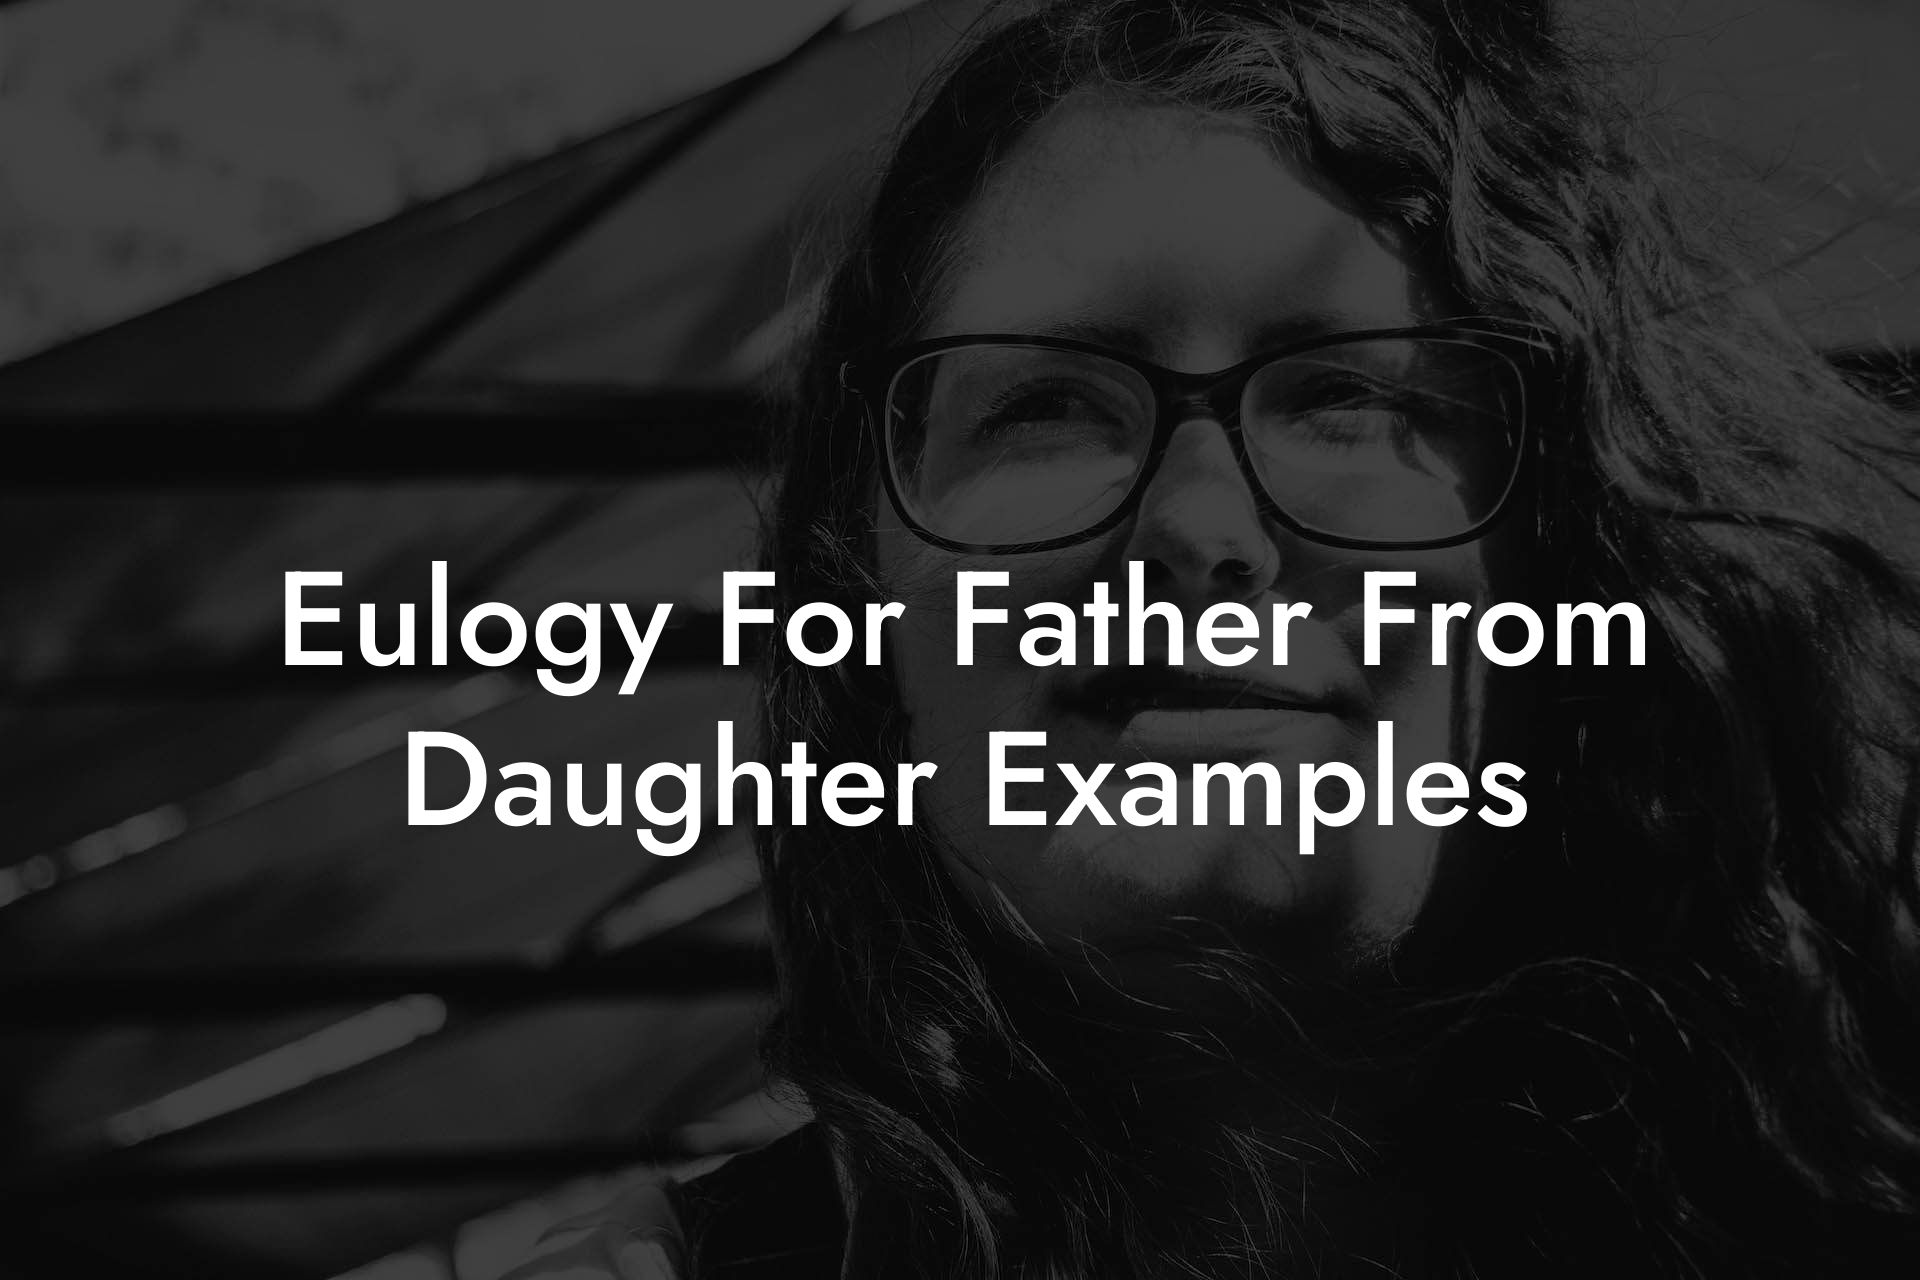 Eulogy For Father From Daughter Examples